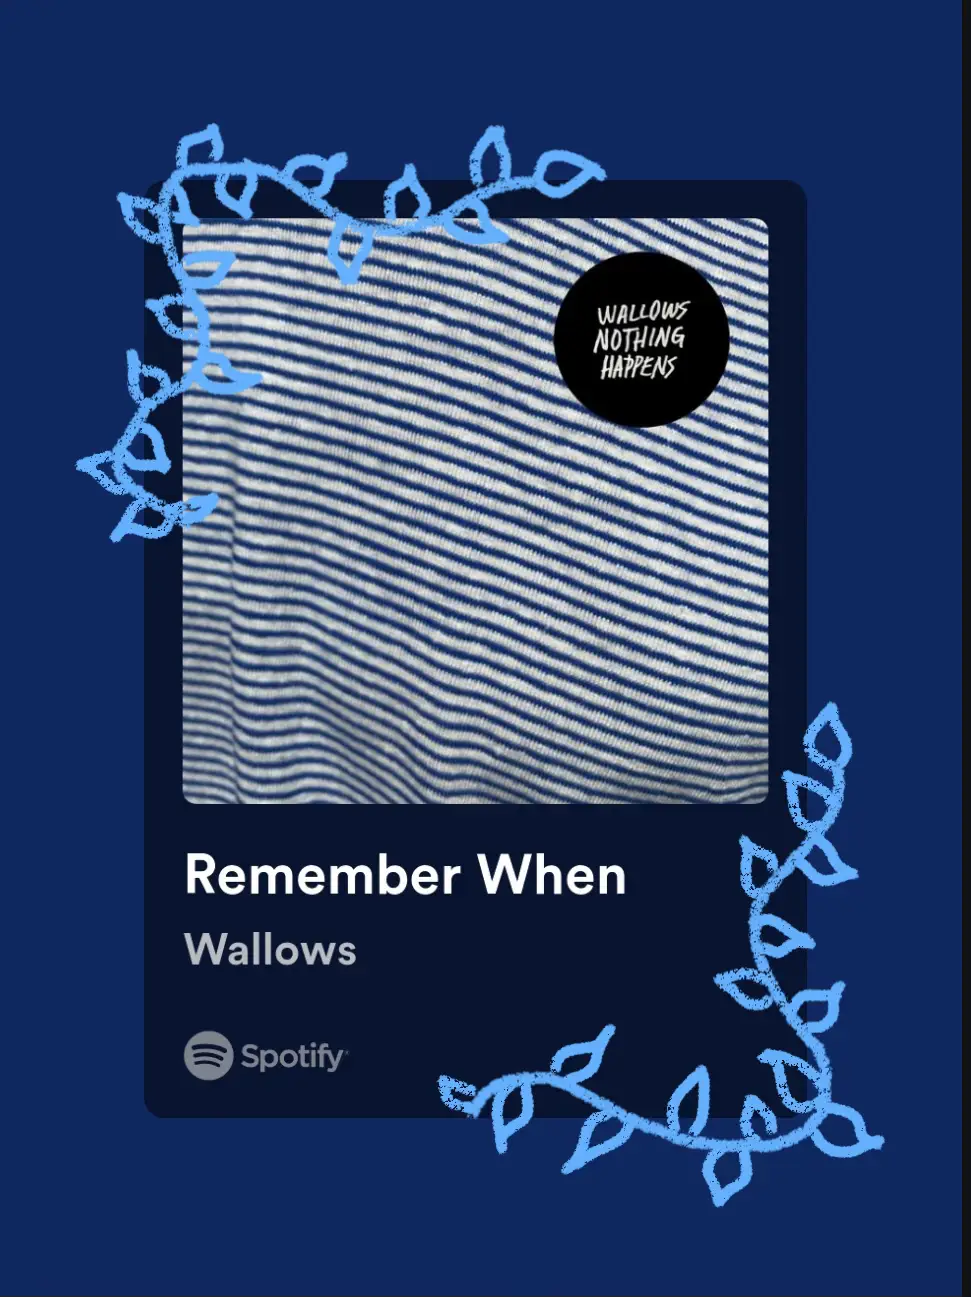  A Spotify ad with a flower and a line graph.